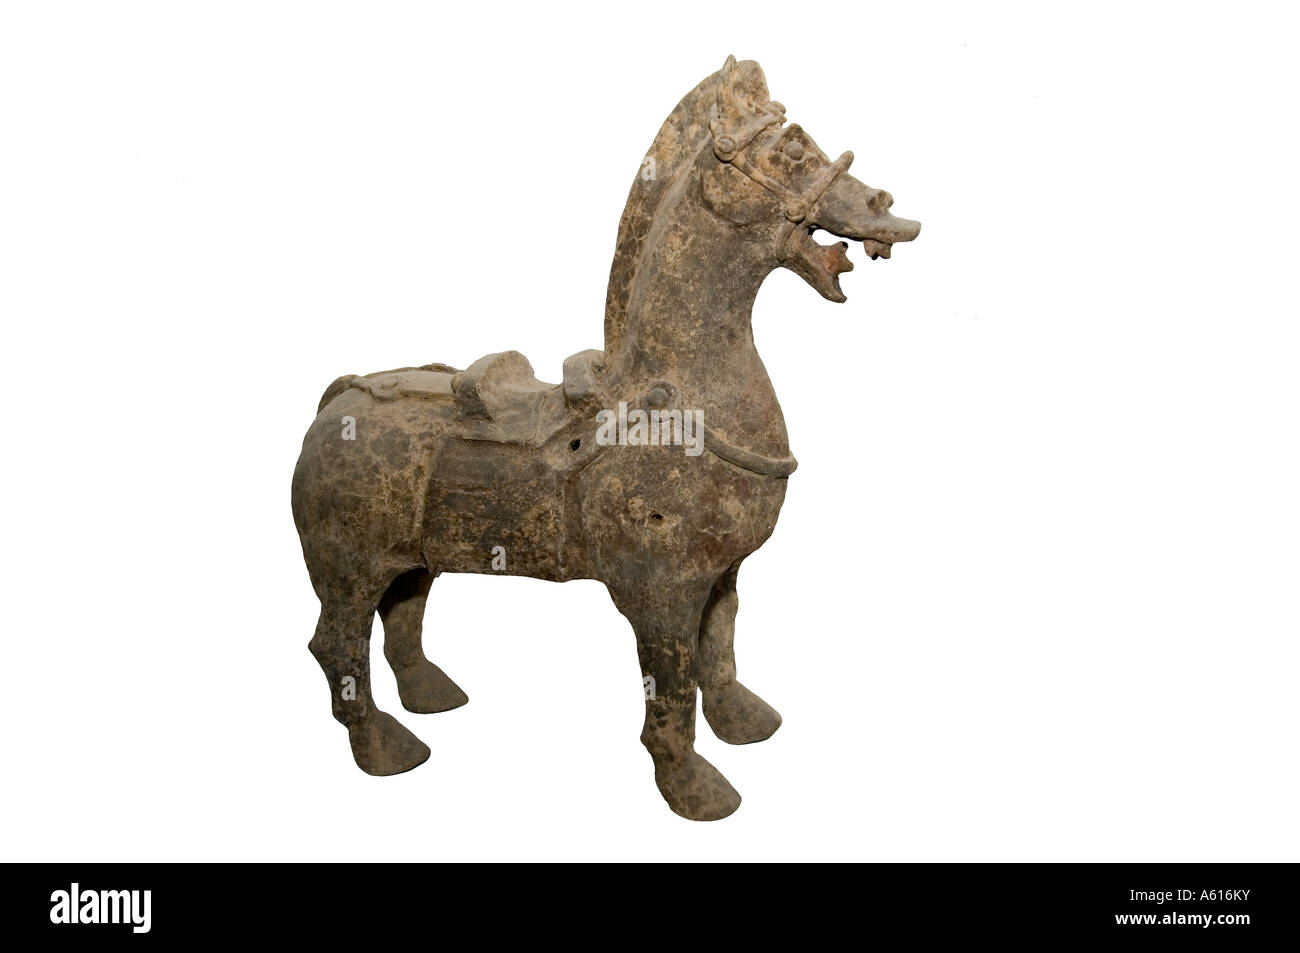 Zibo Ceramics Museum, Shandong Province, China. Pottery Horse from the Warring States Period, Zhoucun Stock Photo